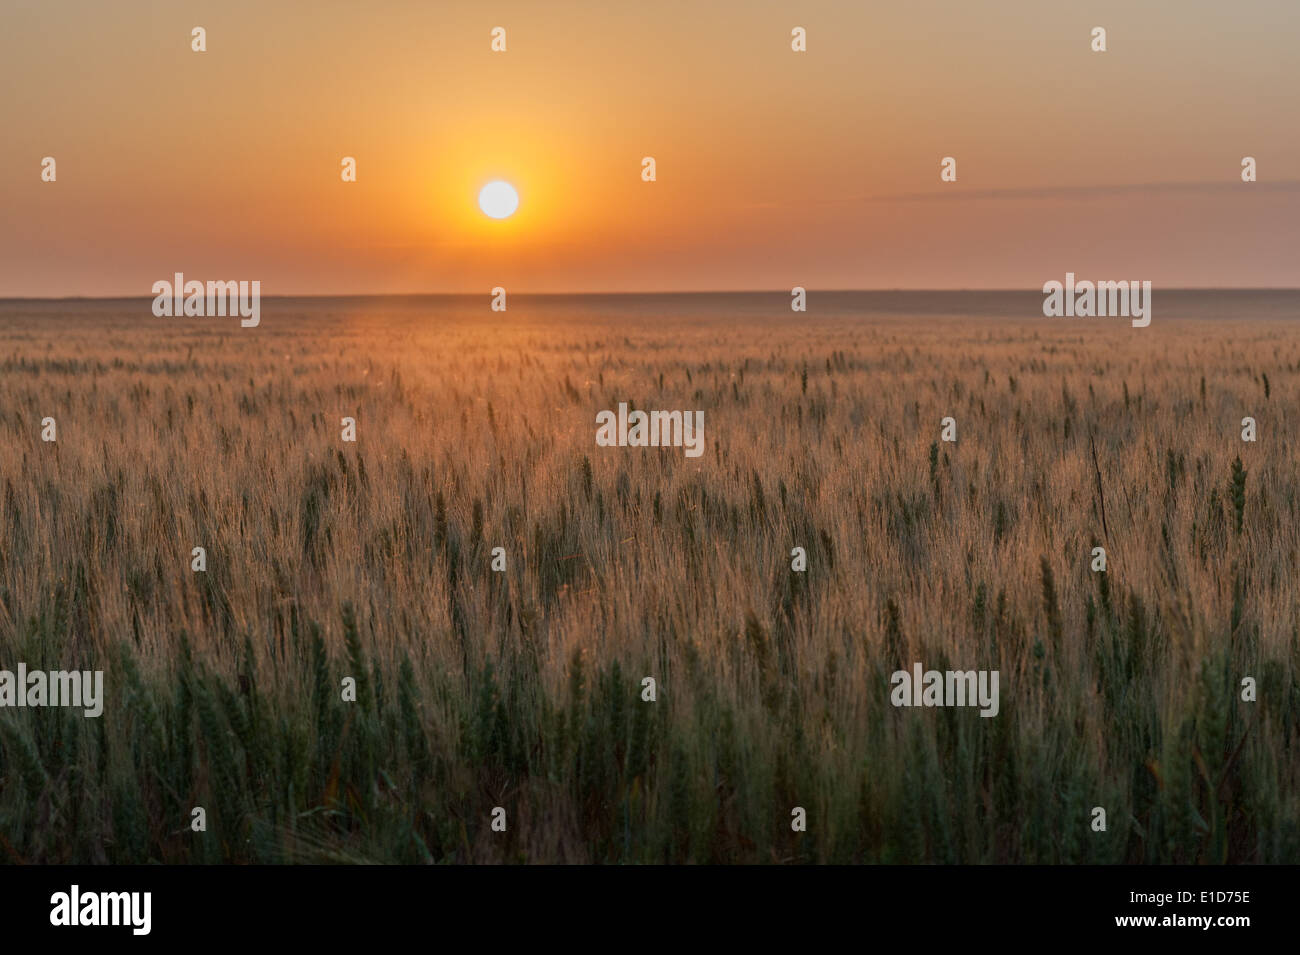 Wheat field on the Great Plains Stock Photo